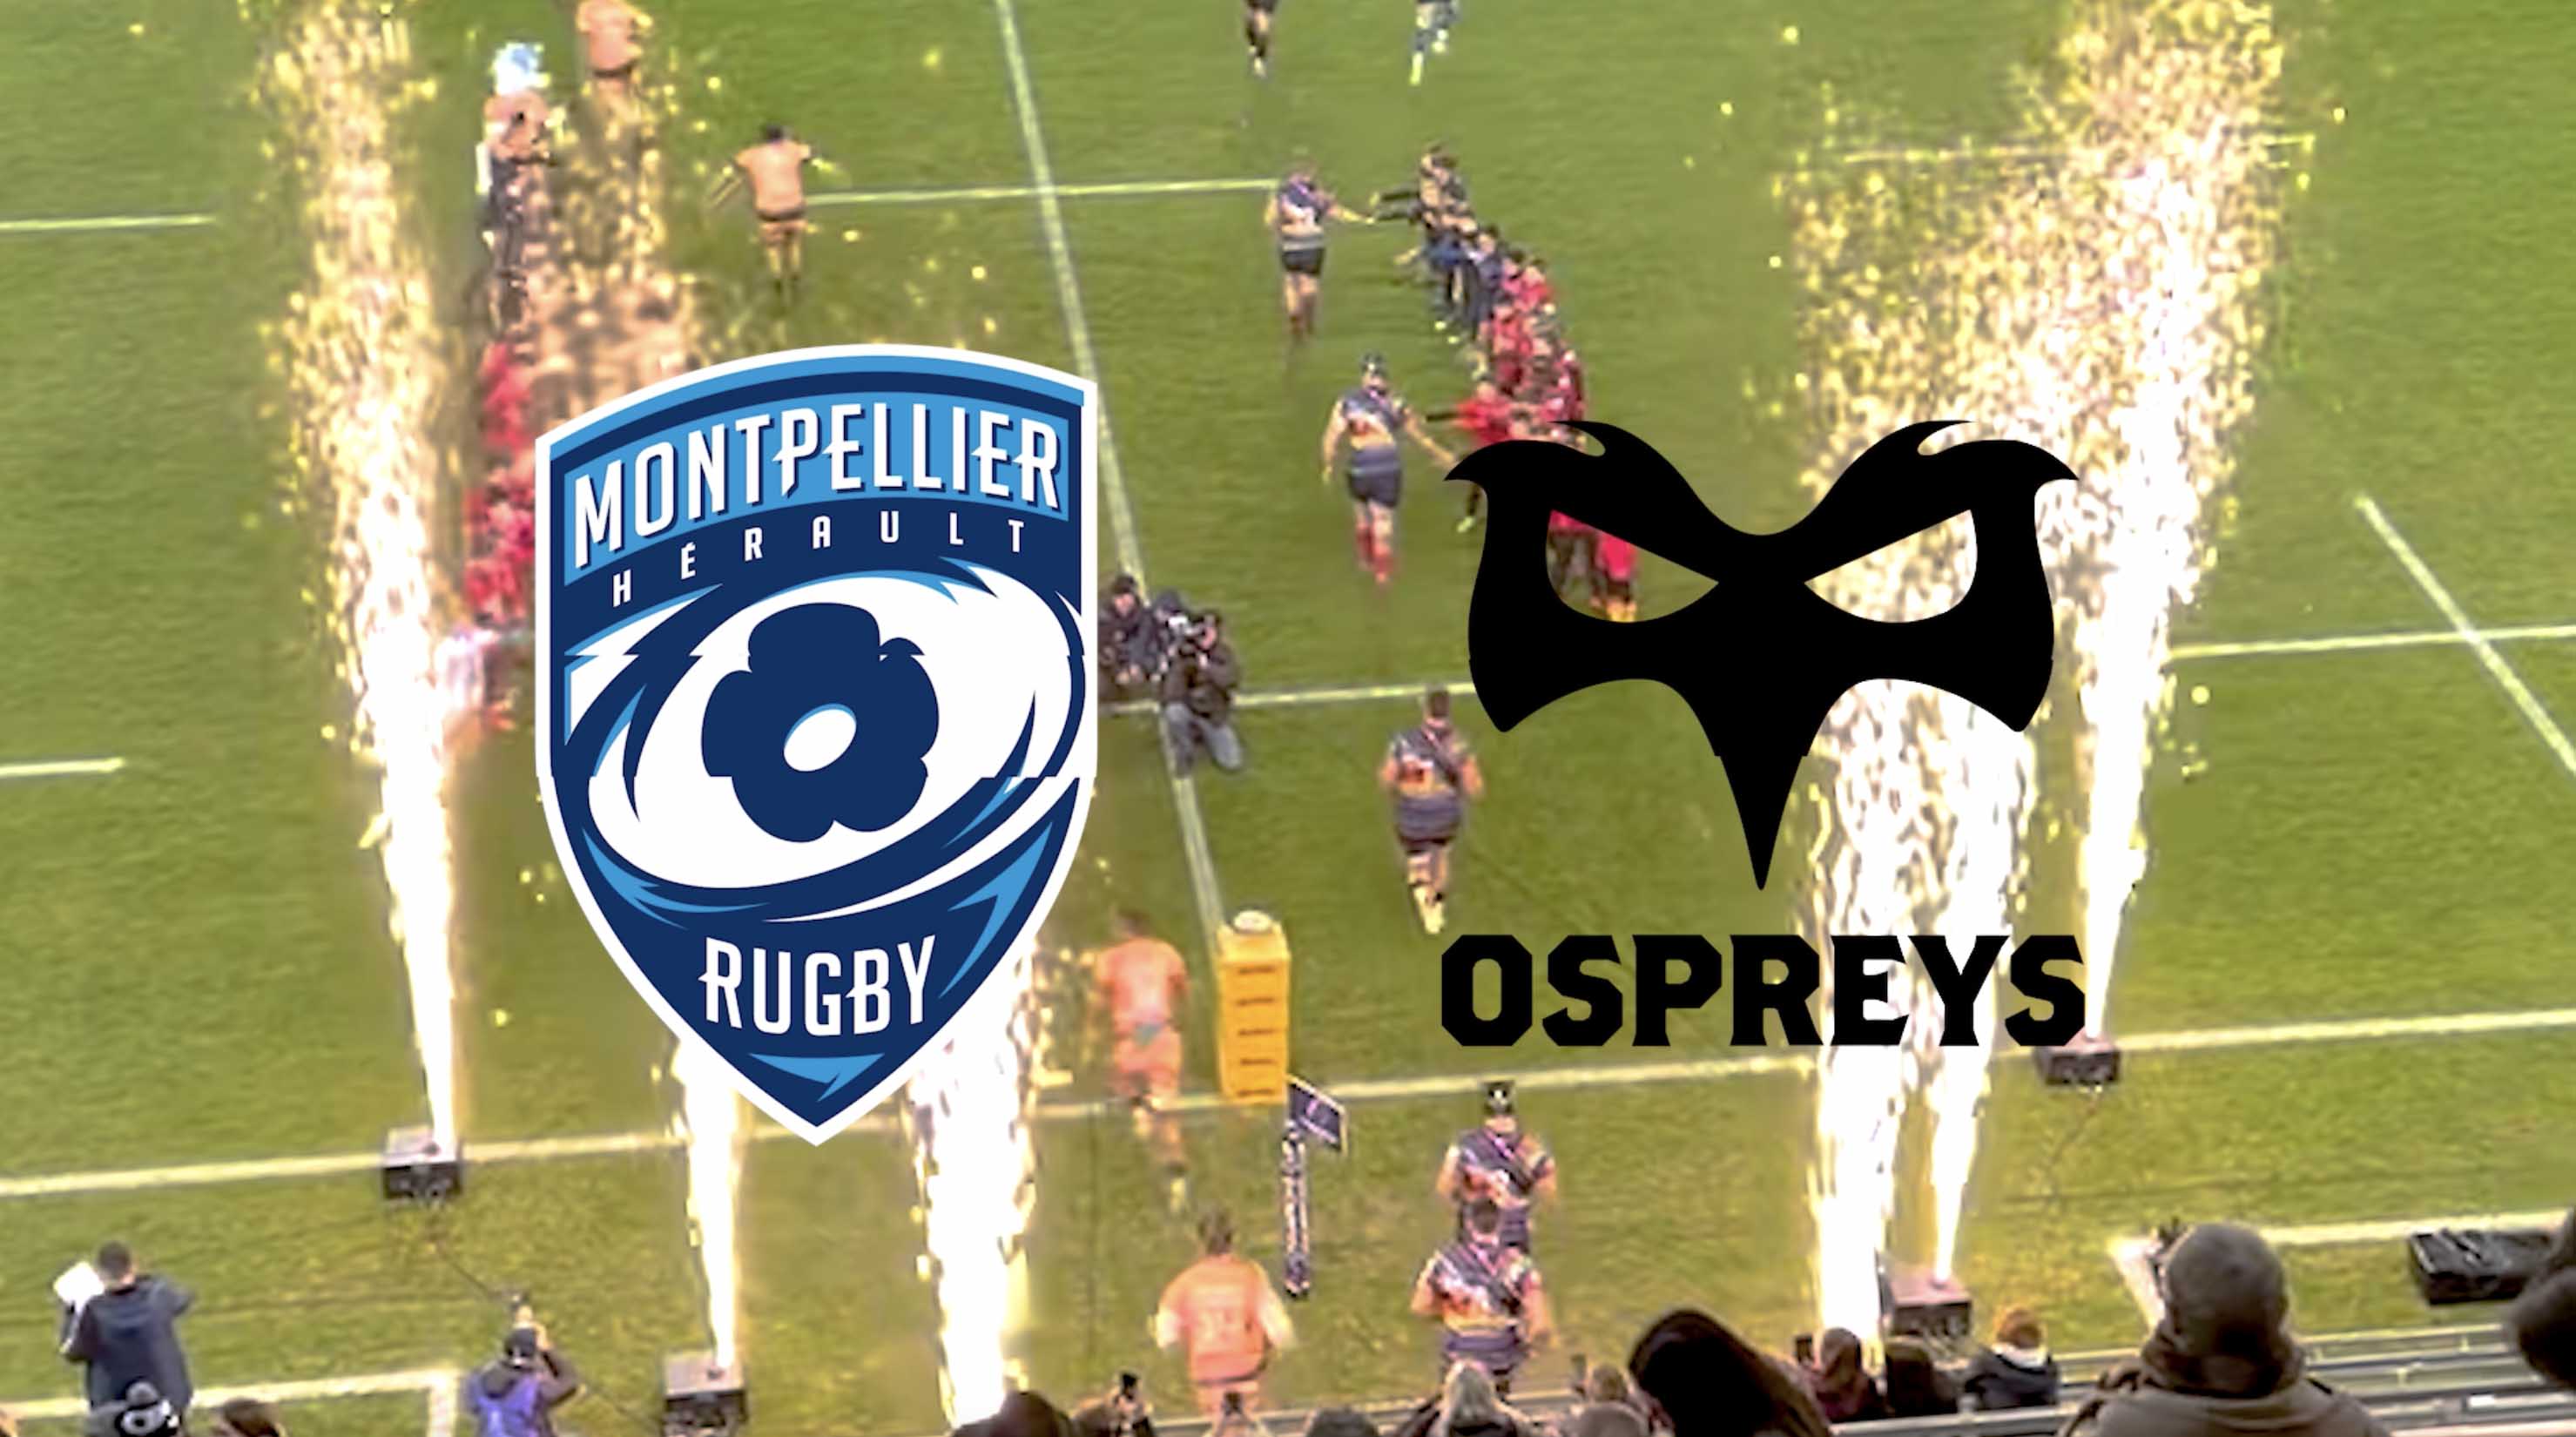 OSPREYS ON THE ROAD